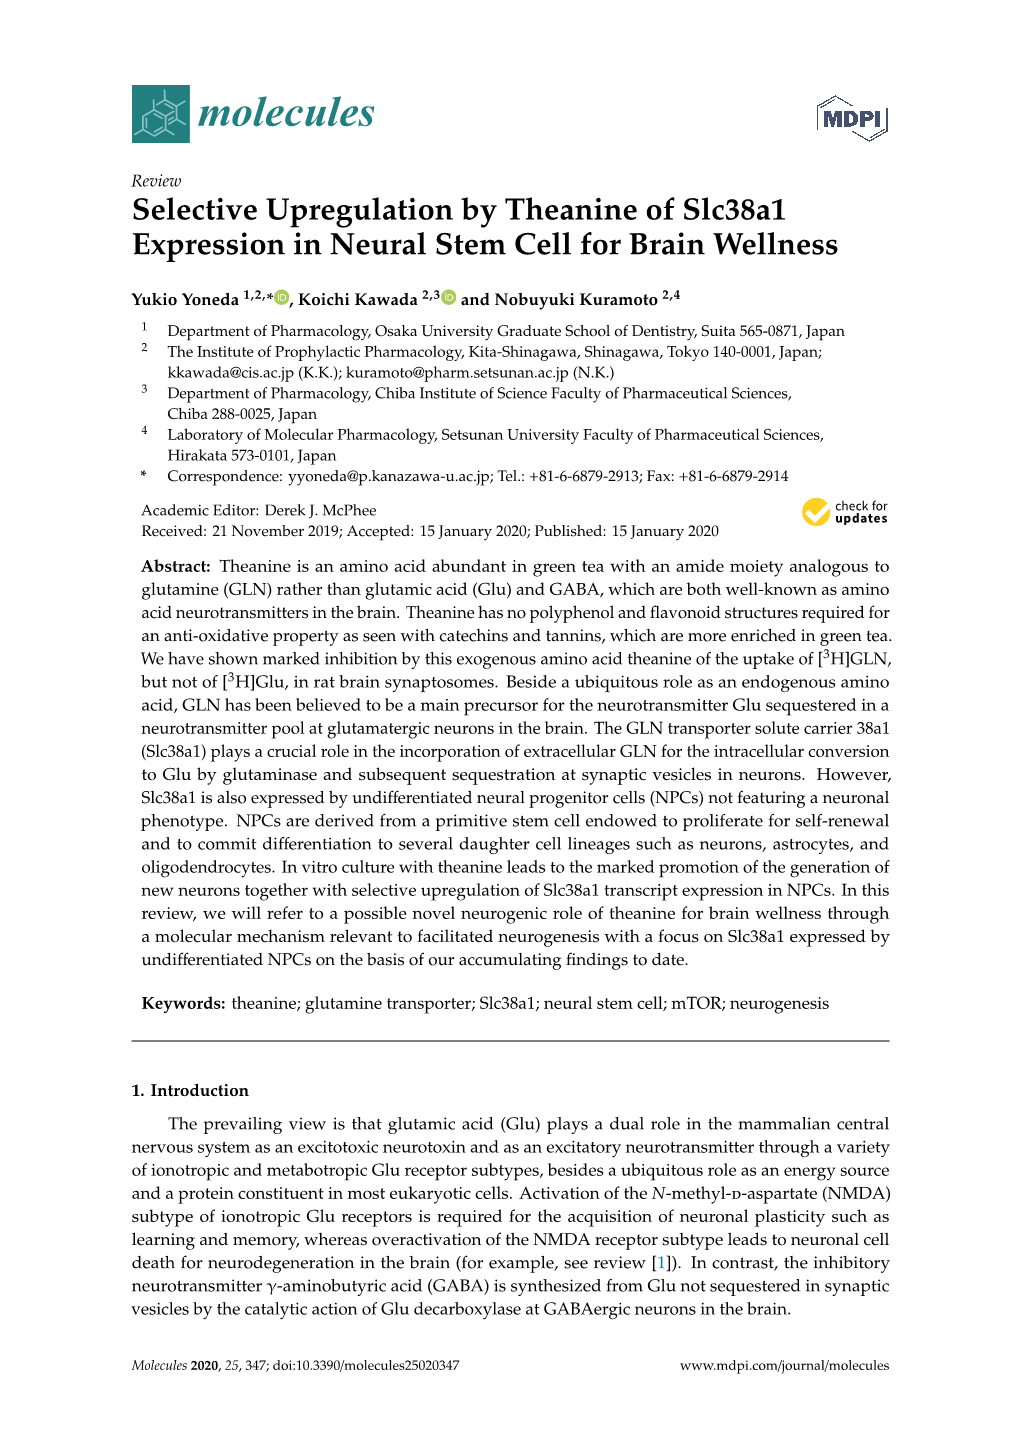 Selective Upregulation by Theanine of Slc38a1 Expression in Neural Stem Cell for Brain Wellness